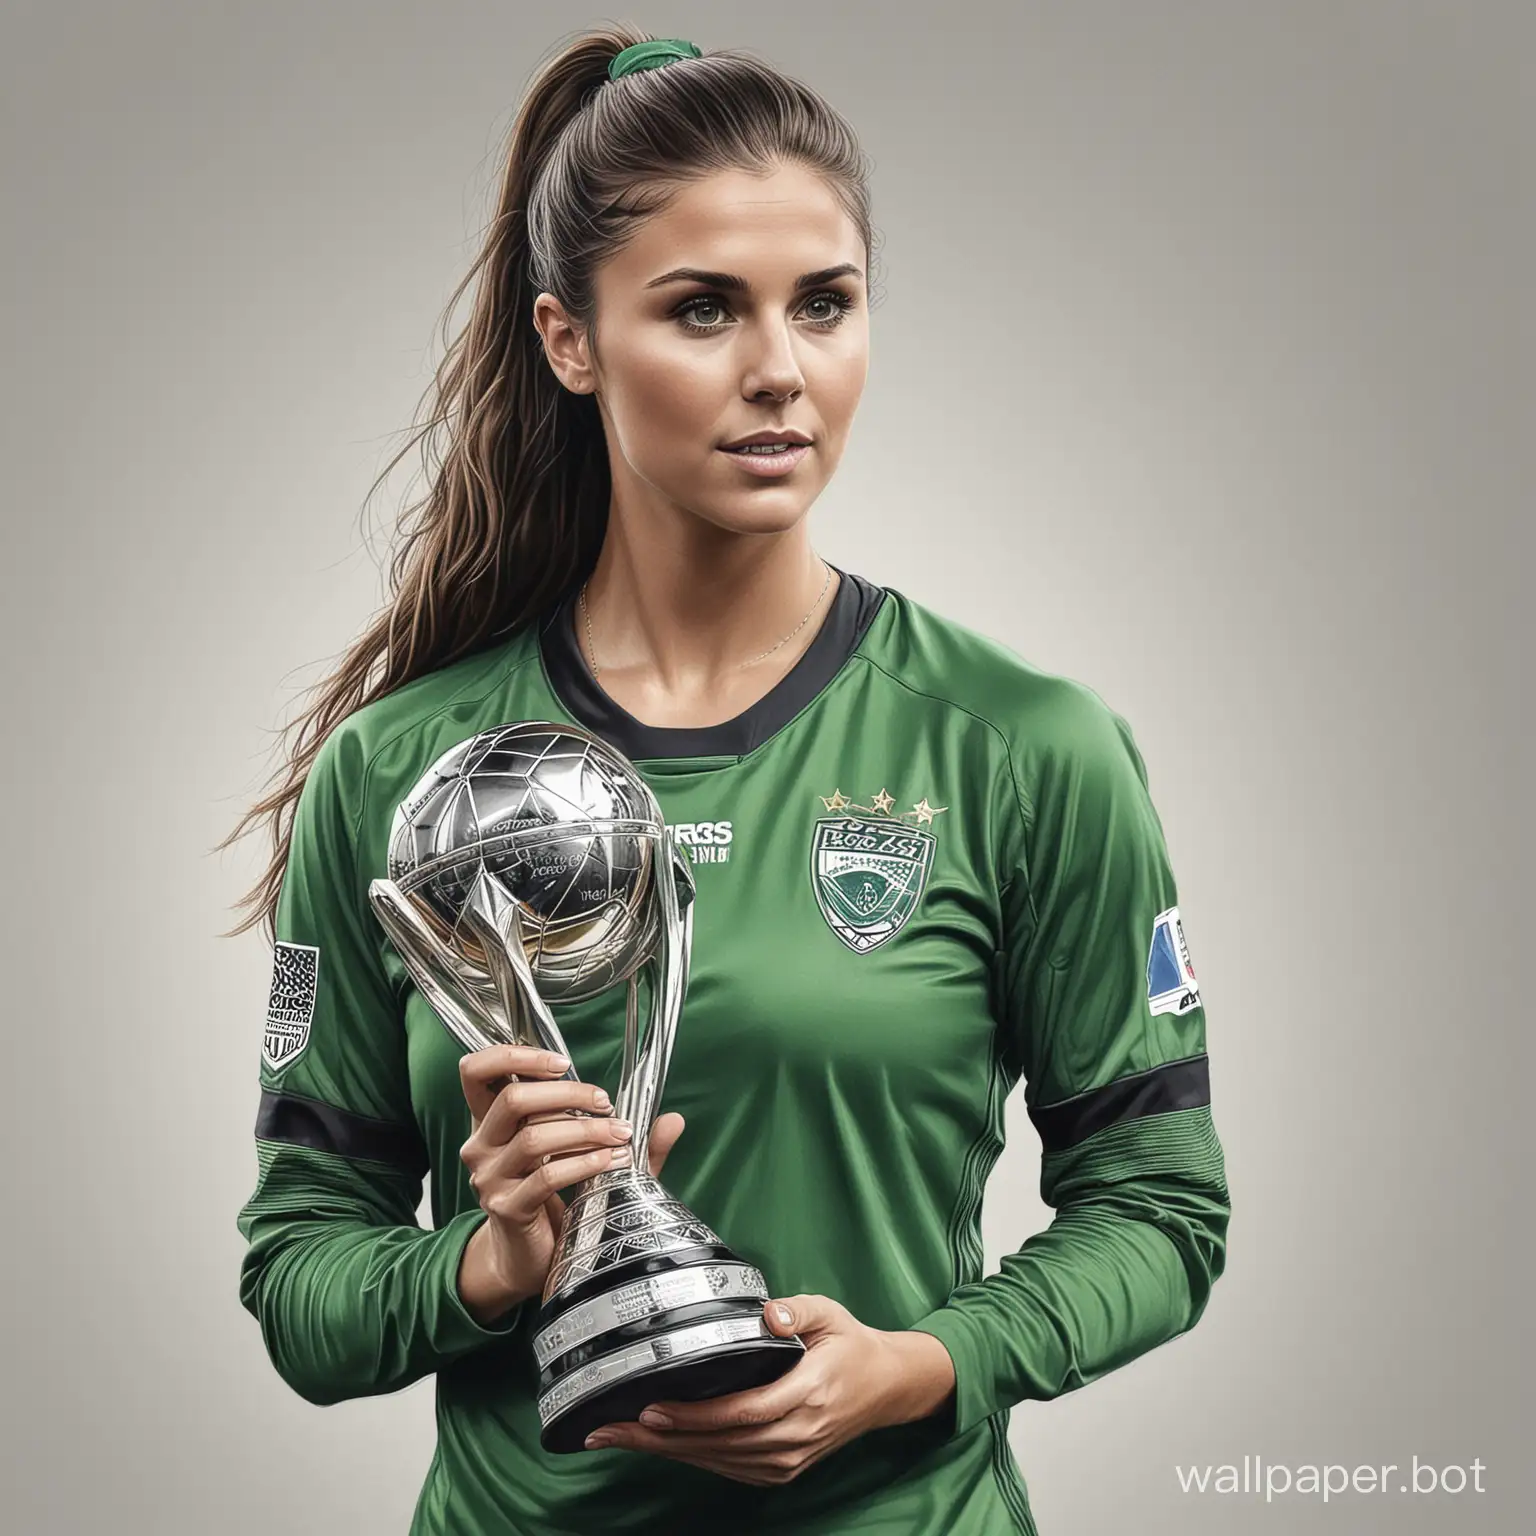 Alex-Morgan-Sketch-Young-Soccer-Star-with-Trophy-in-Hand